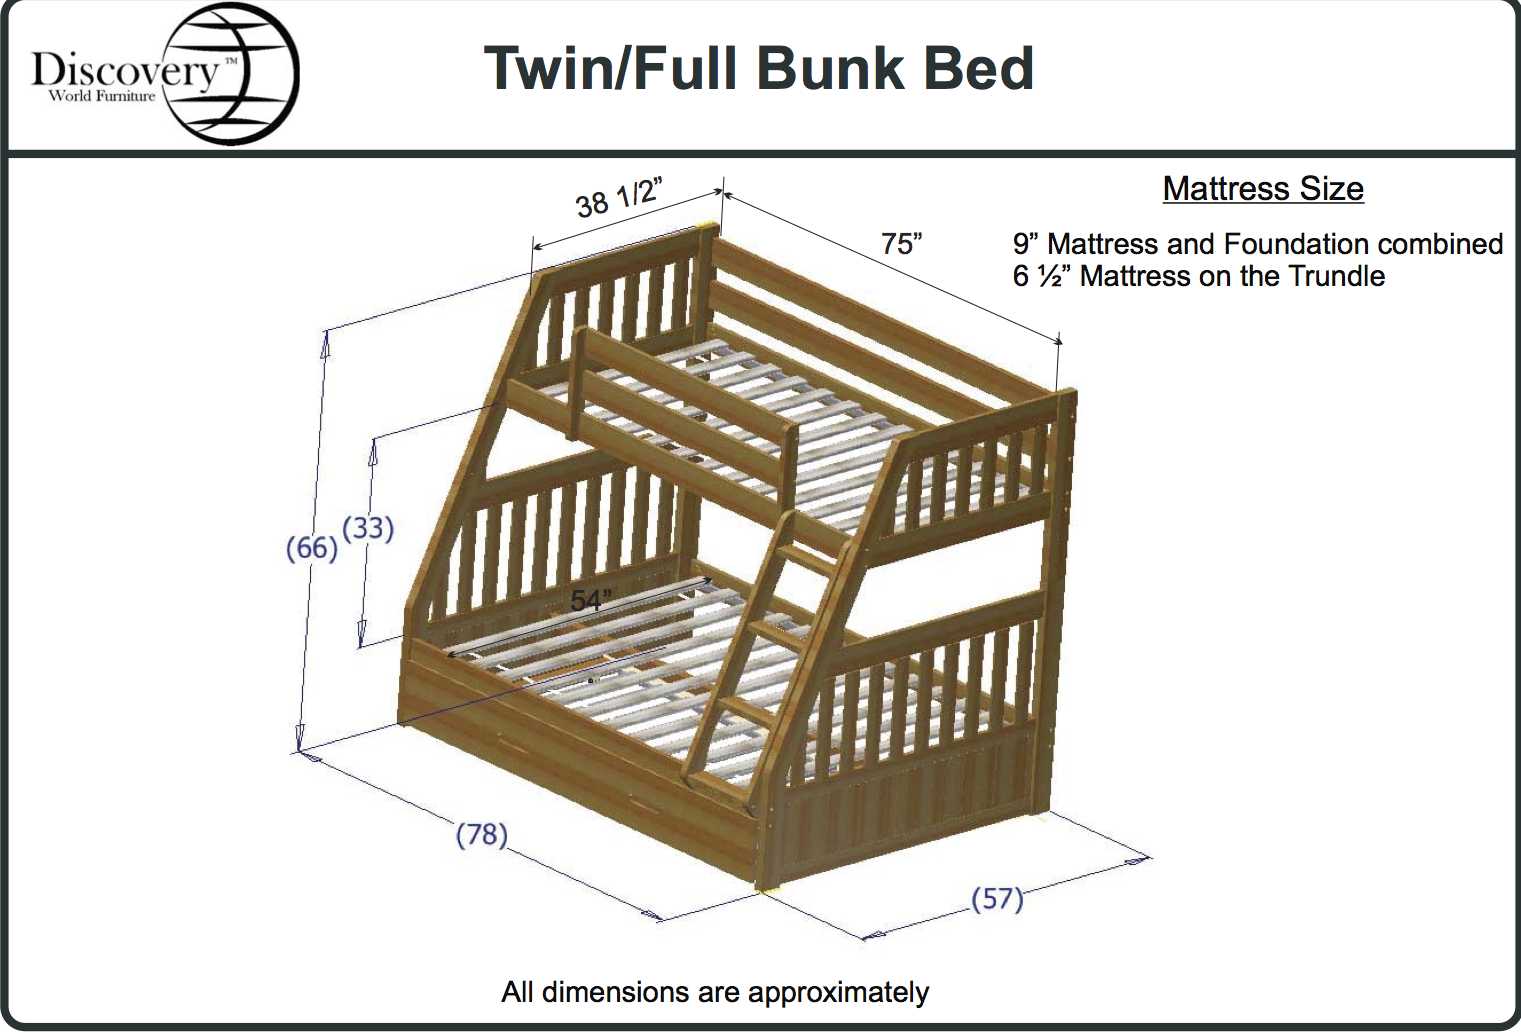 Discovery World Furniture Twin Over, Bunk Bed Twin Mattress Size